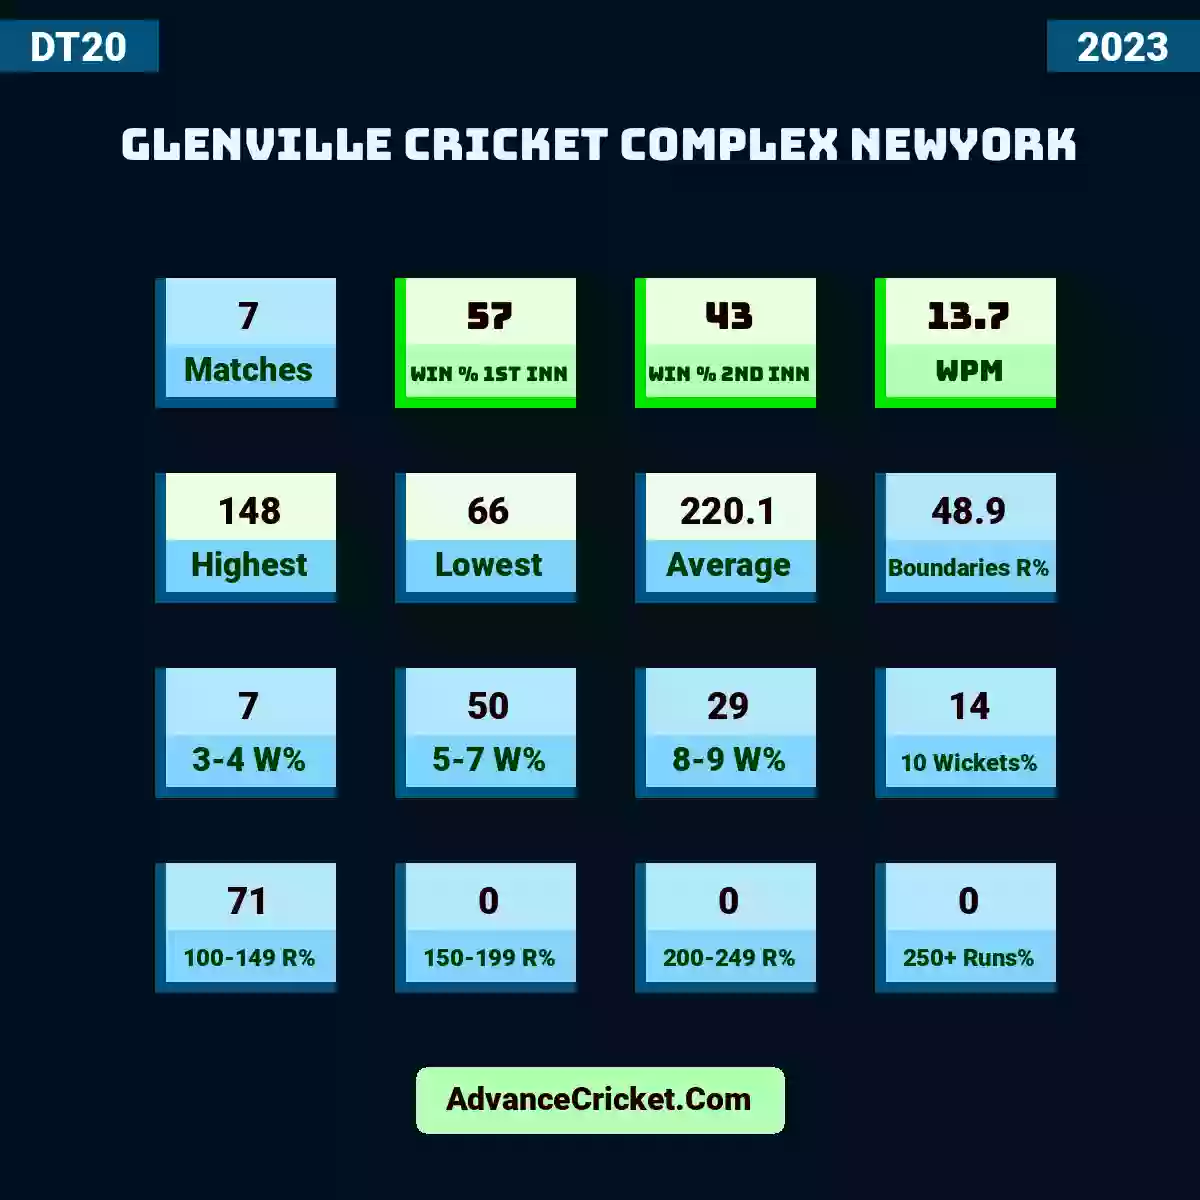 Image showing Glenville cricket complex Newyork with Matches: 7, Win % 1st Inn: 57, Win % 2nd Inn: 43, WPM: 13.7, Highest: 148, Lowest: 66, Average: 220.1, Boundaries R%: 48.9, 3-4 W%: 7, 5-7 W%: 50, 8-9 W%: 29, 10 Wickets%: 14, 100-149 R%: 71, 150-199 R%: 0, 200-249 R%: 0, 250+ Runs%: 0.